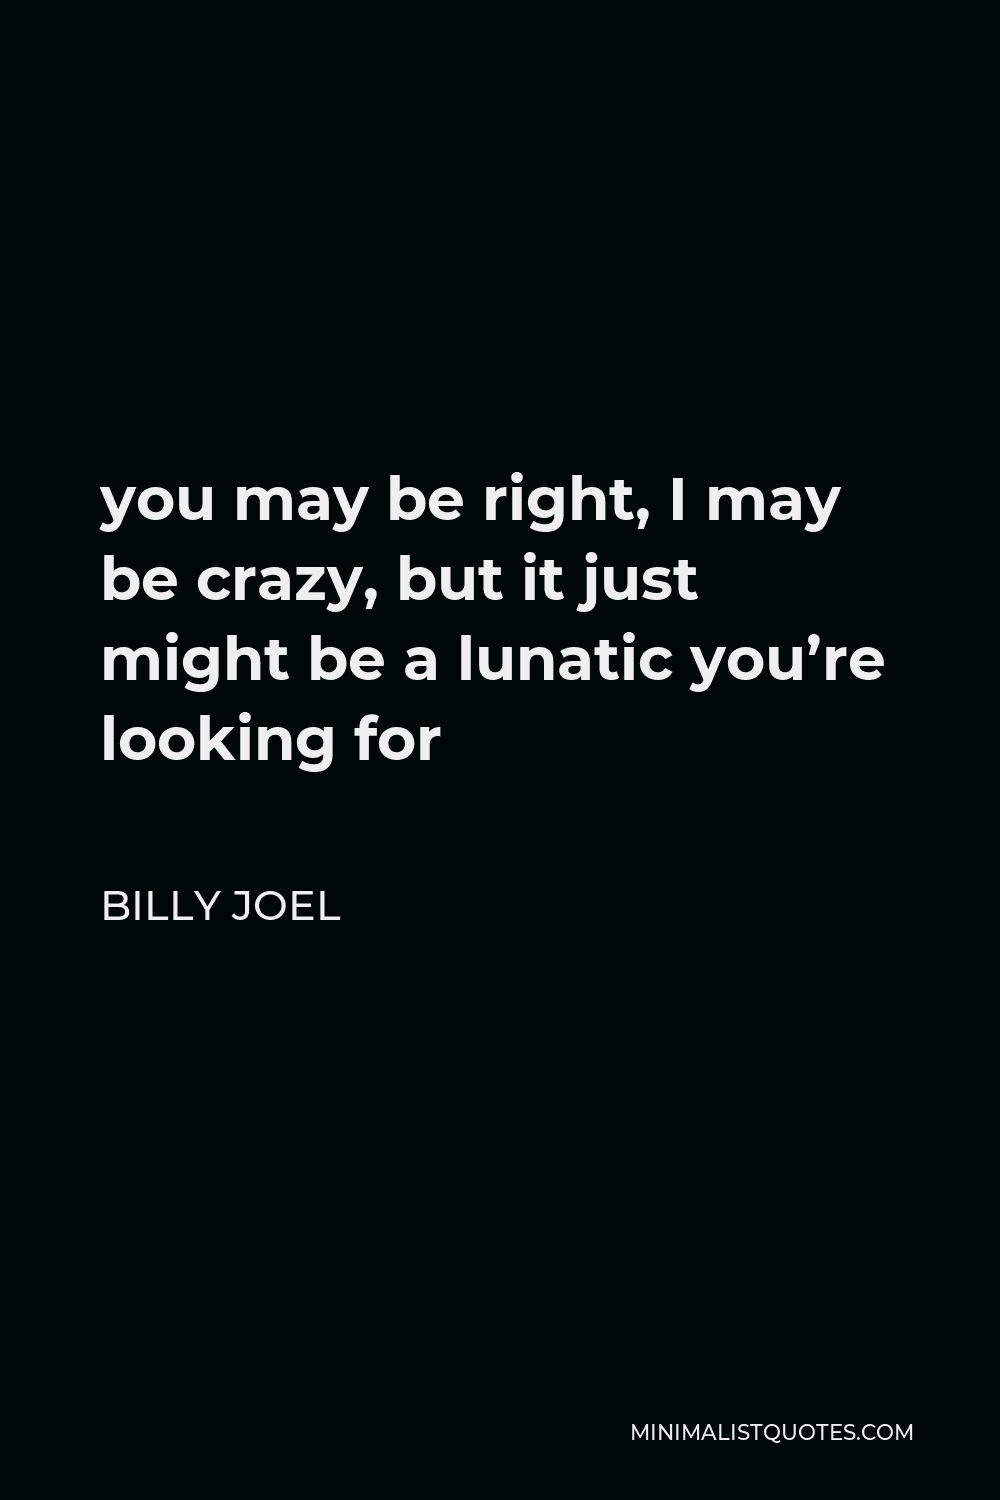 Billy Joel Quote - you may be right, I may be crazy, but it just might be a lunatic you’re looking for